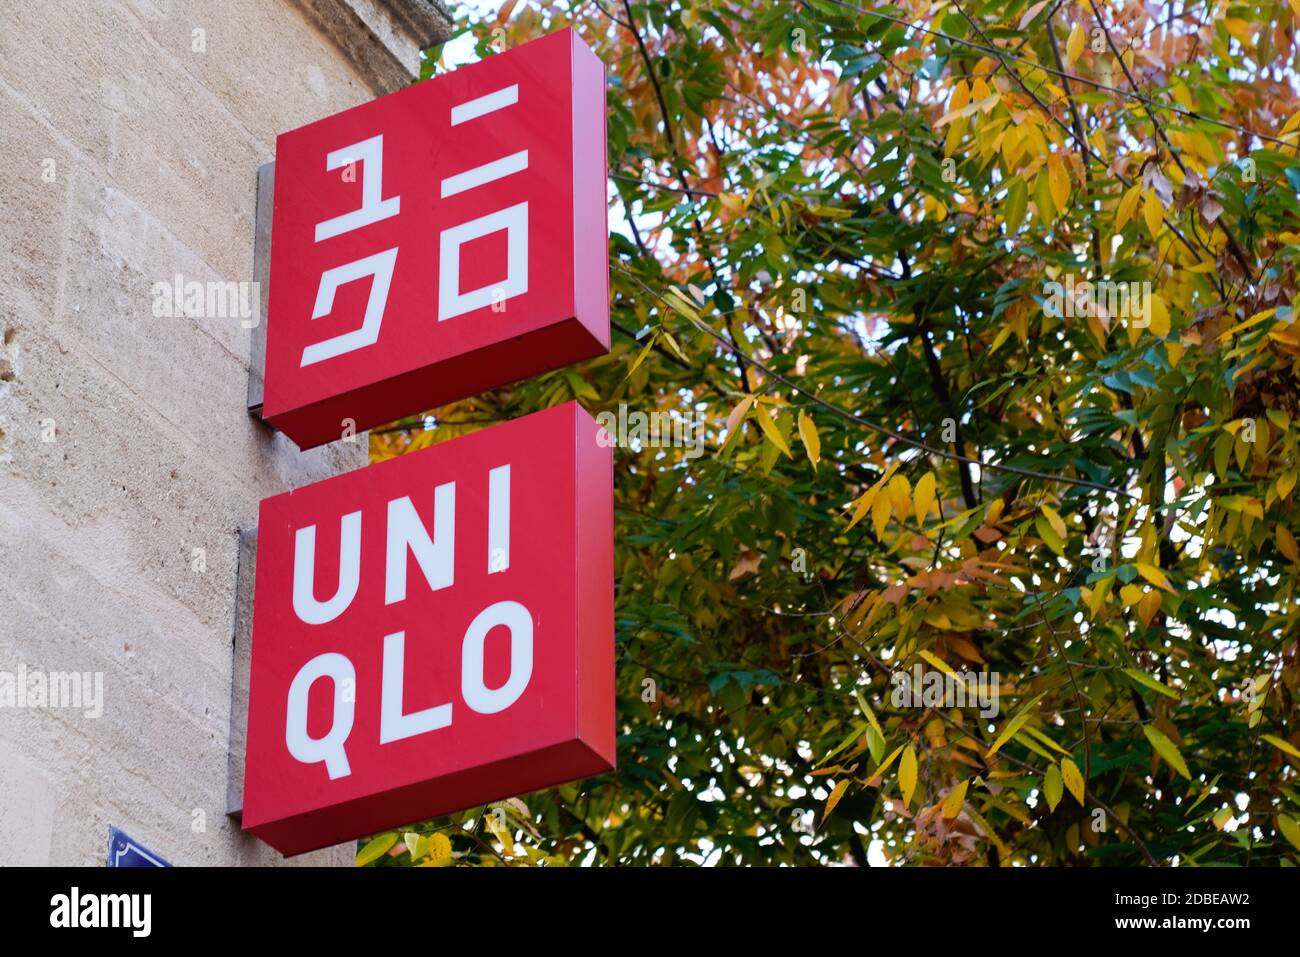 Bordeaux , Aquitaine / France - 11 01 2020 : uniqlo text sign and logo  front of store brand Japanese casual wear designer manufacturer Stock Photo  - Alamy